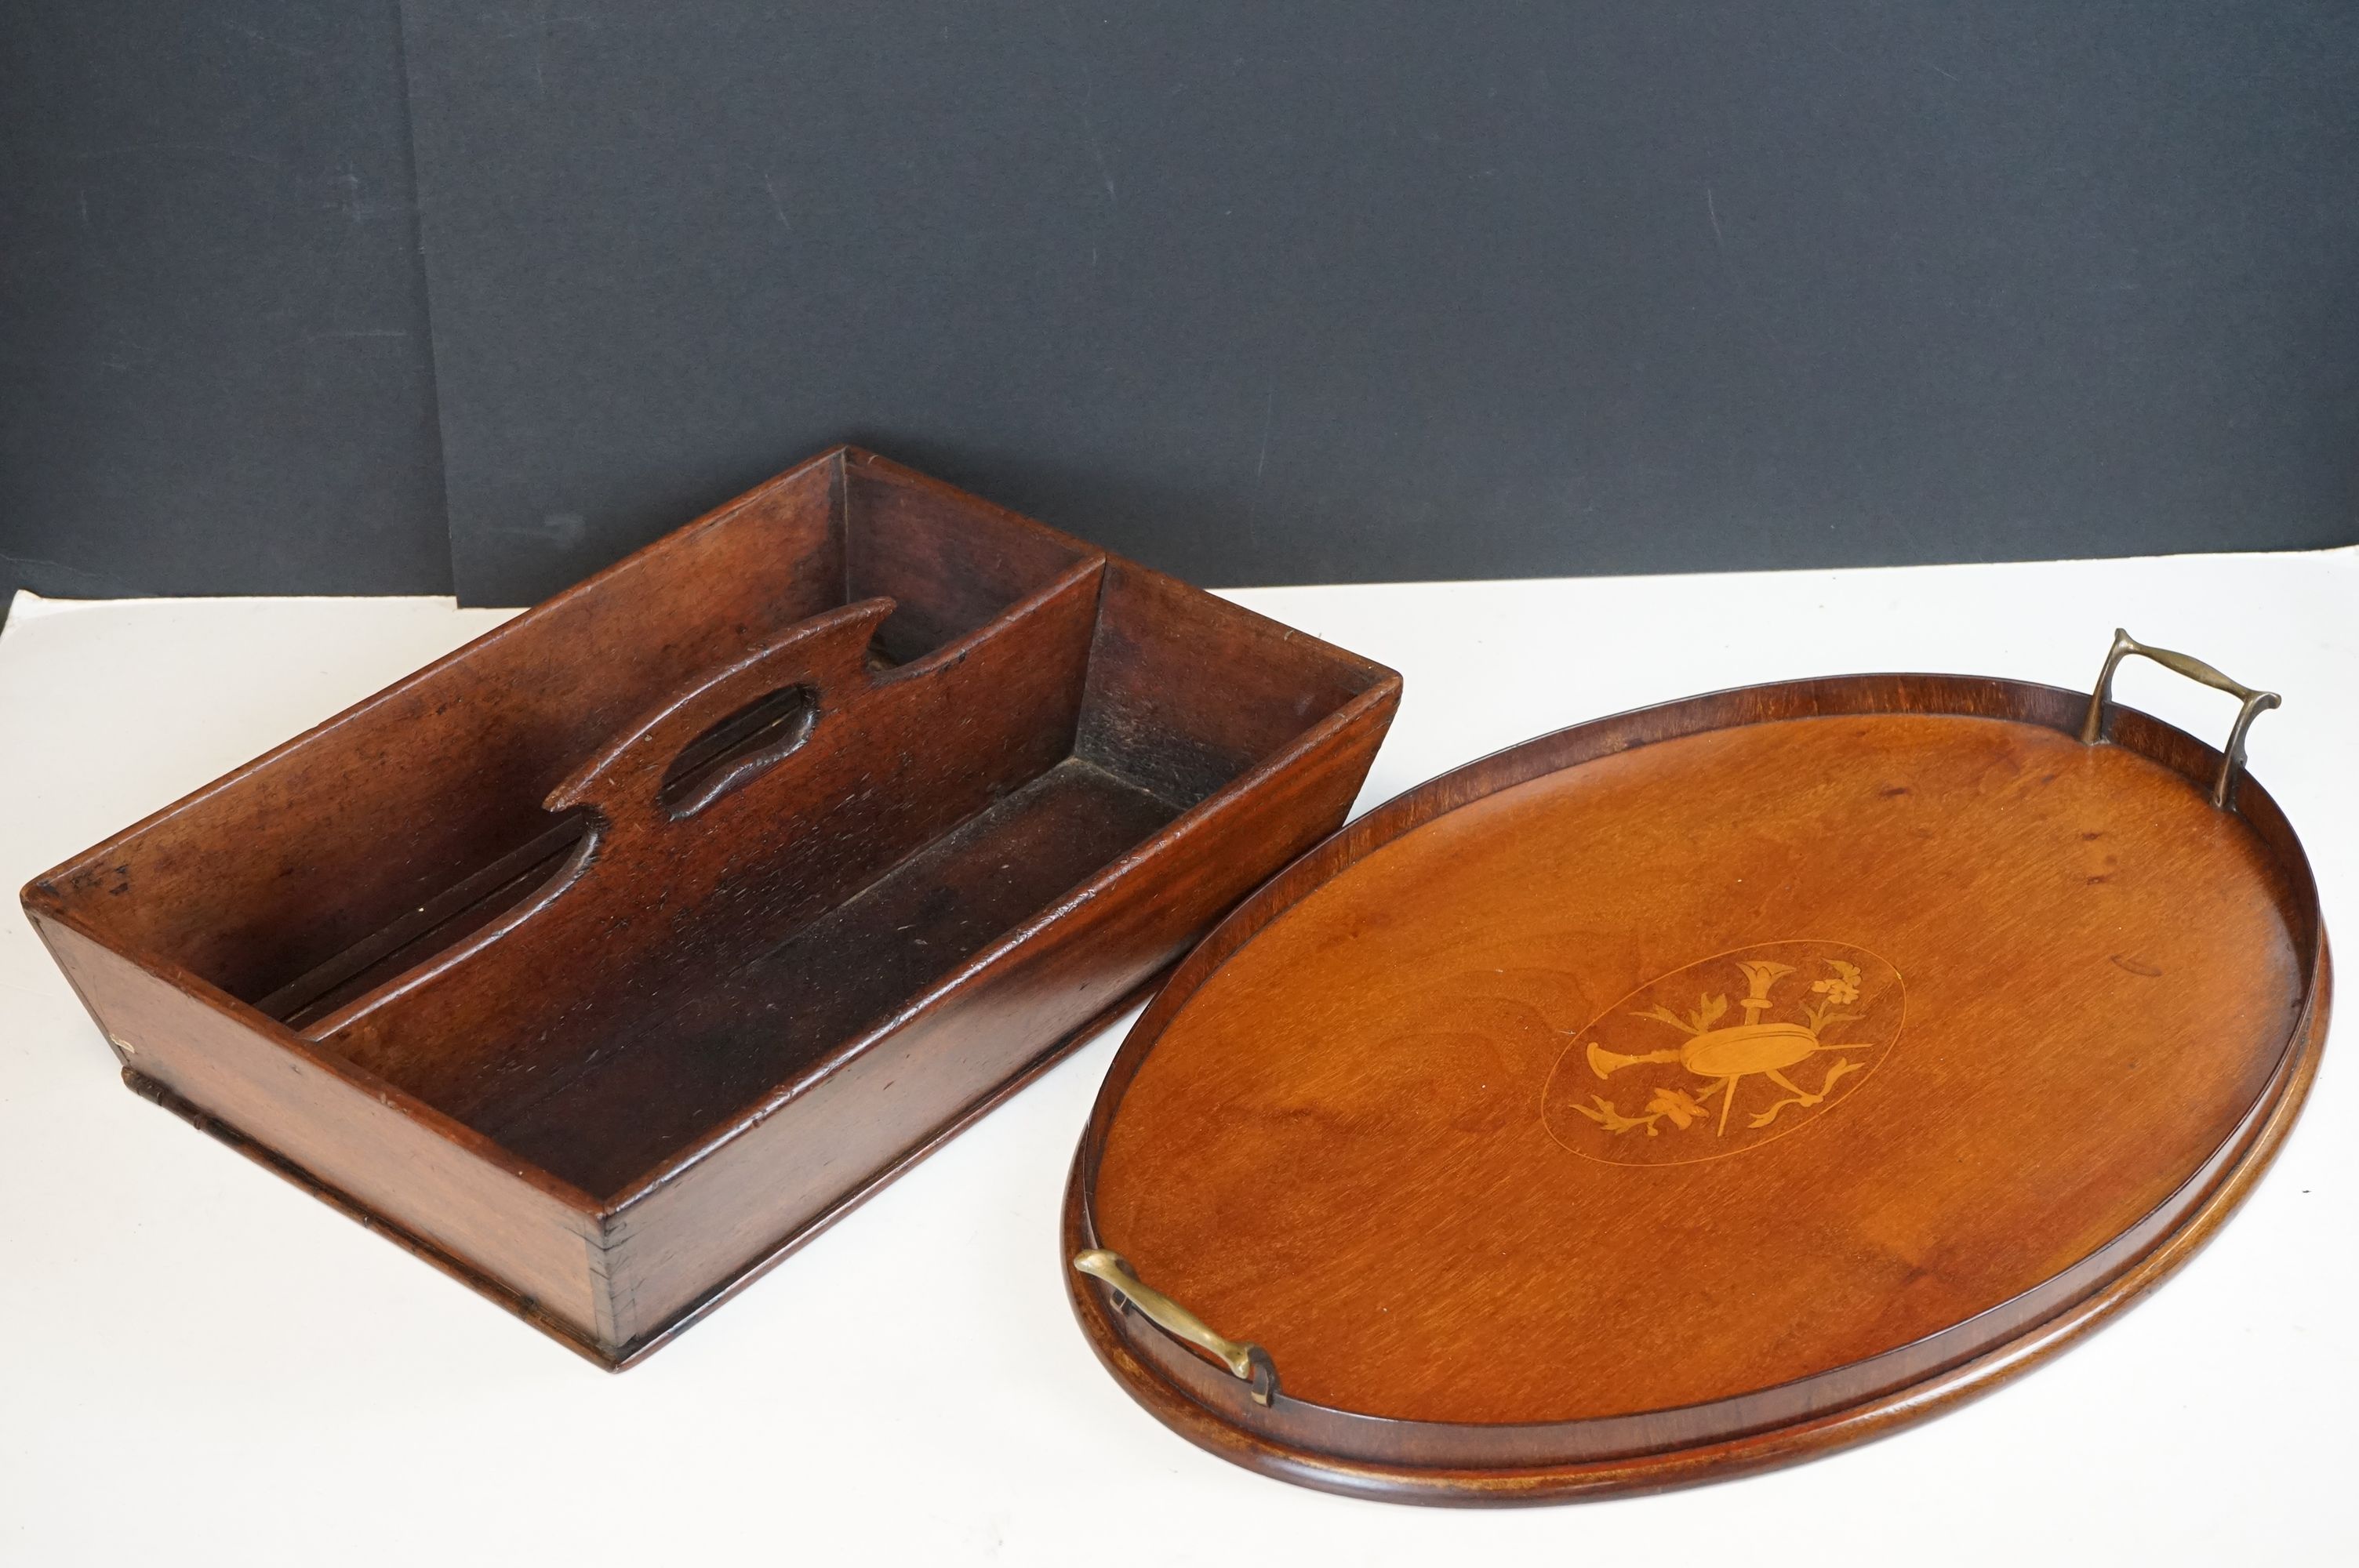 Mahogany tray, together with a wooden cutlery tray